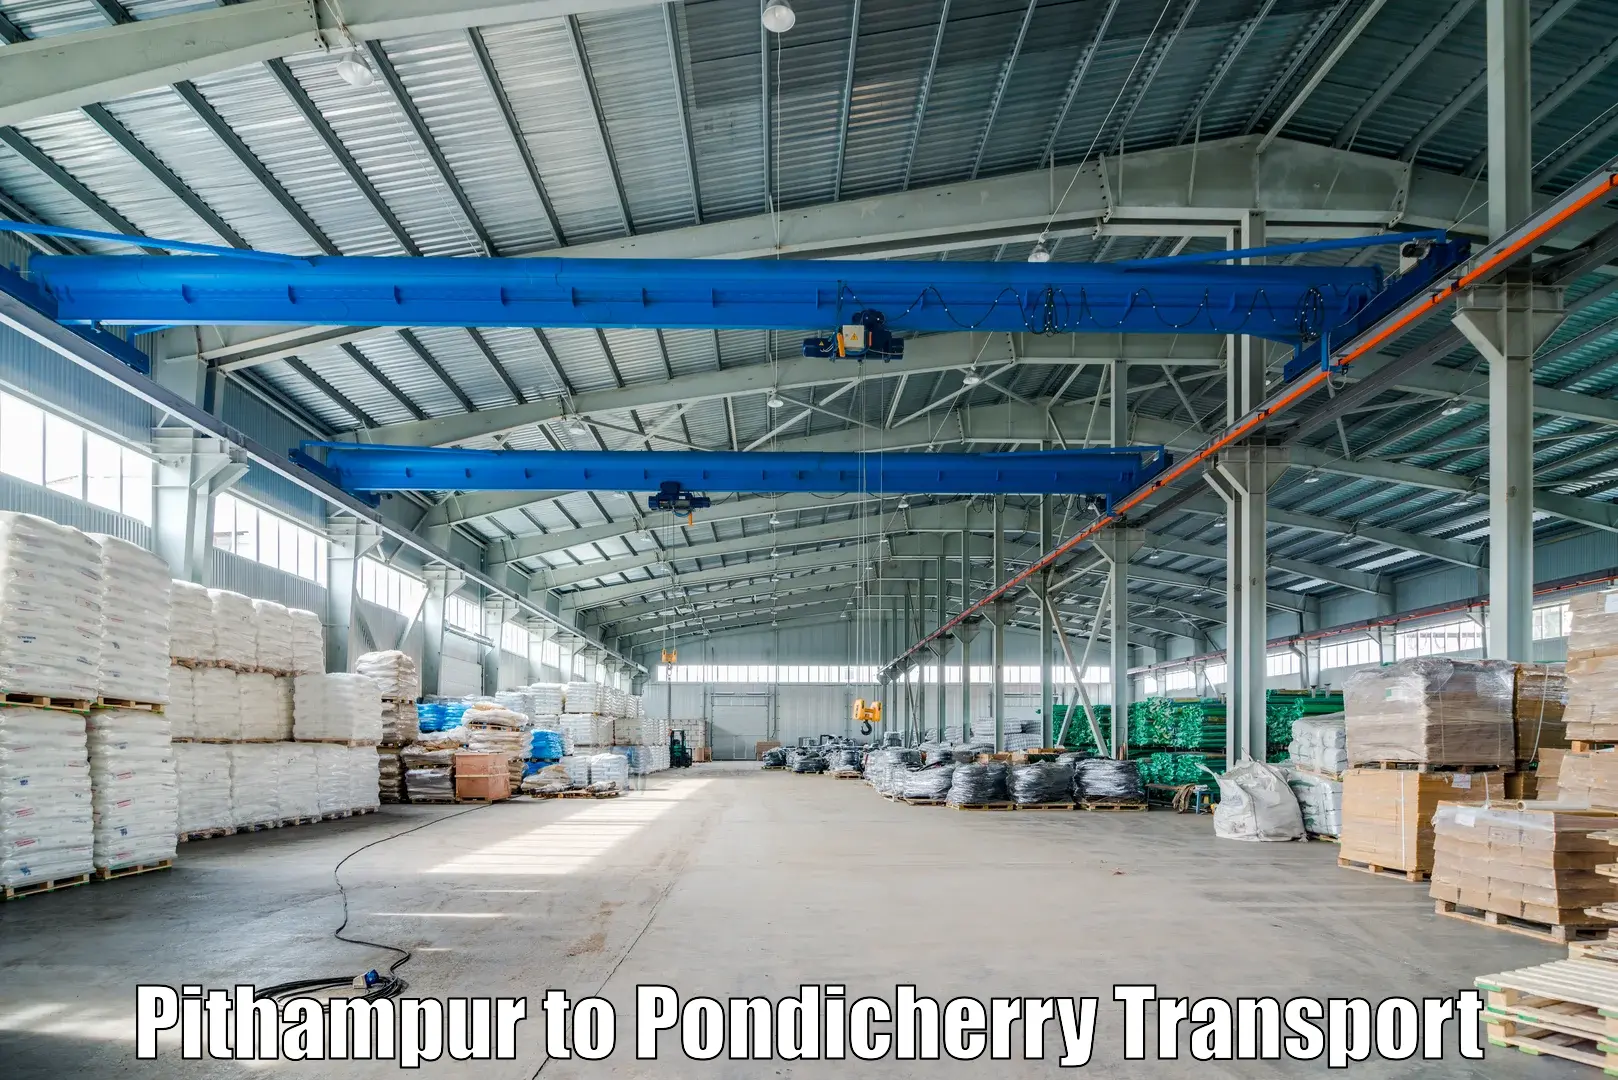 Nearby transport service Pithampur to Pondicherry